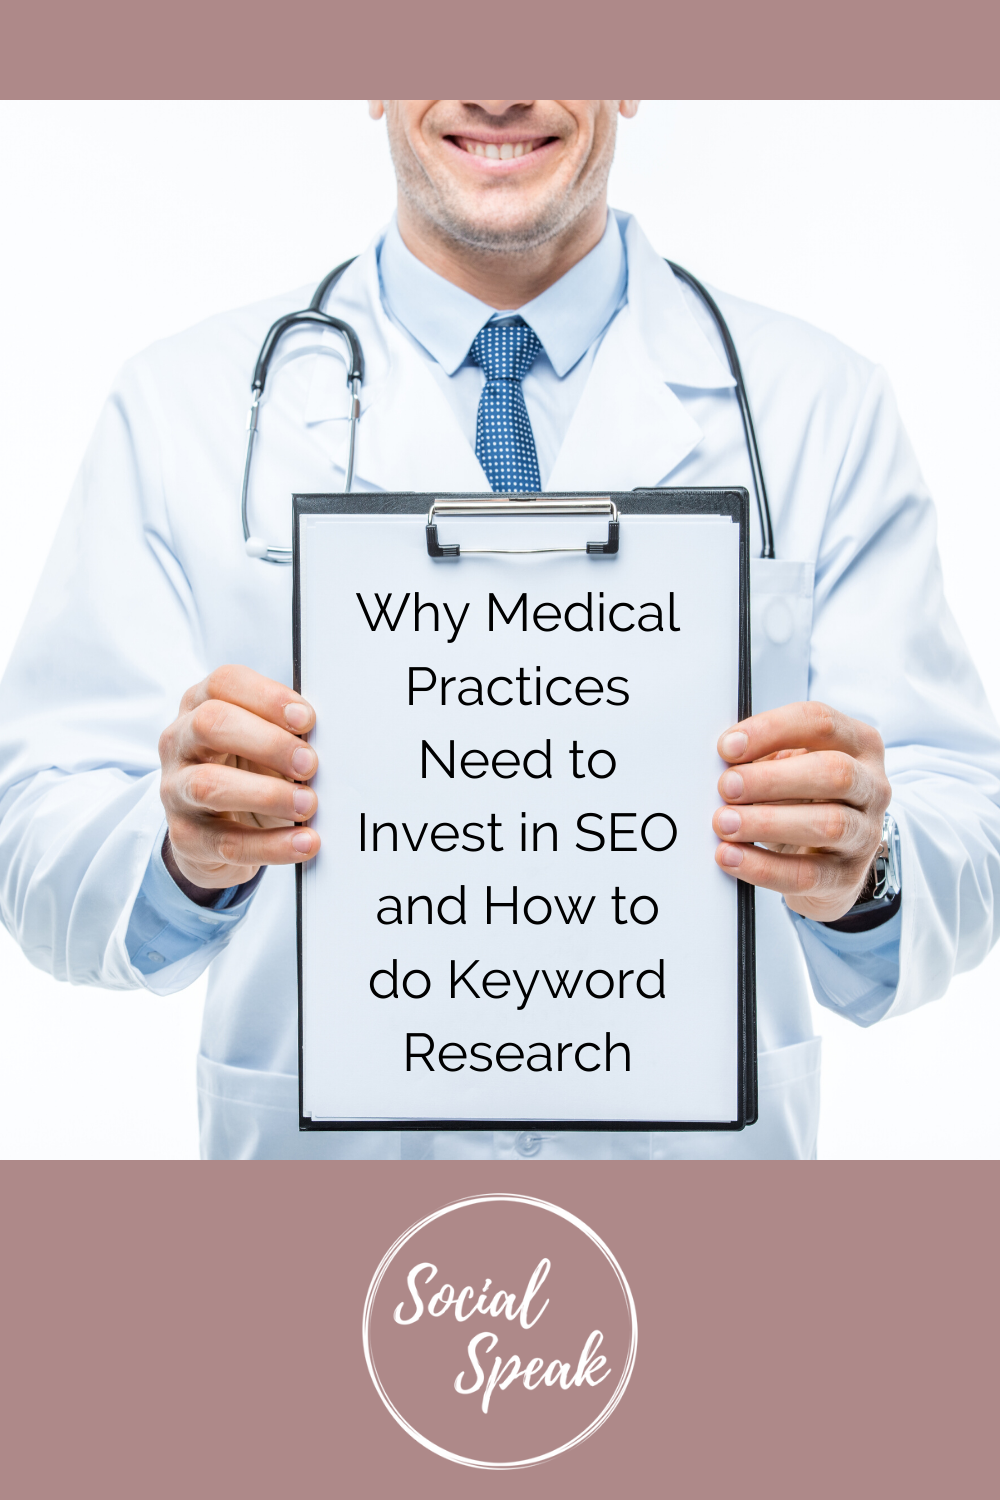 Why Medical Practices Need to Invest in SEO and How to do Keyword Research